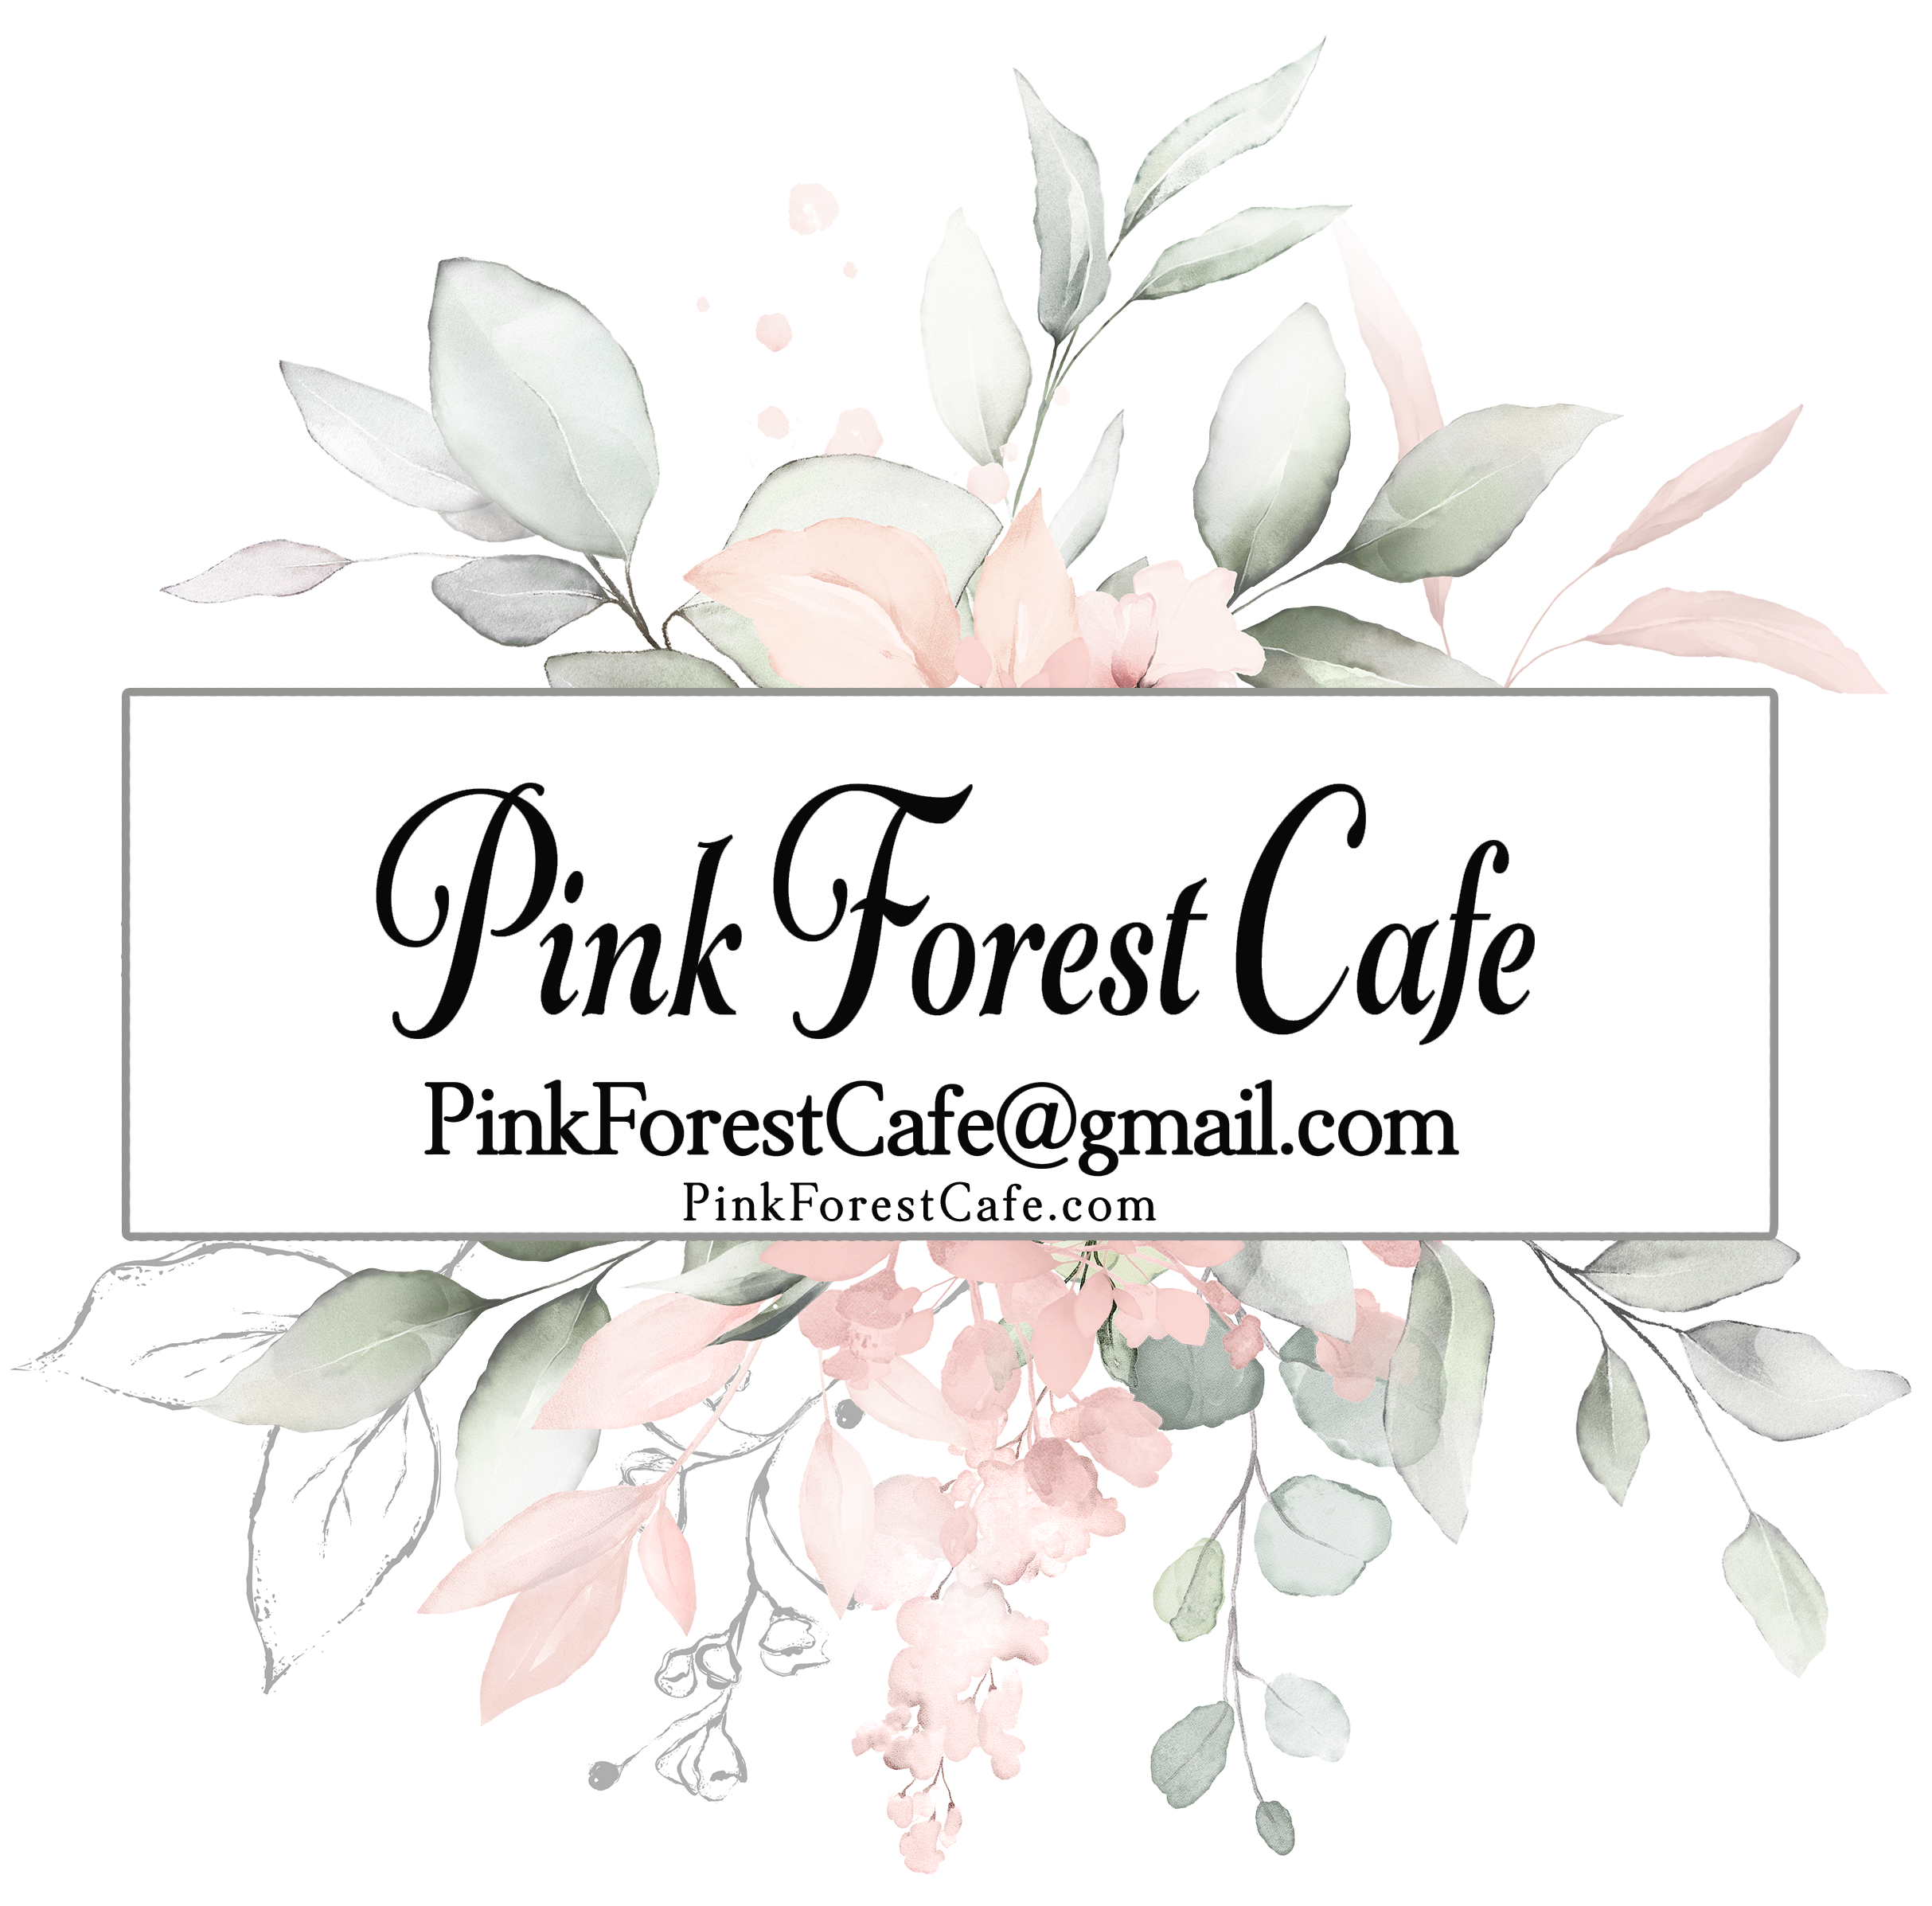 Order My Print - Pink Forest Cafe - 8 (Eight) Prints - 8 Designs Printed and Shipped